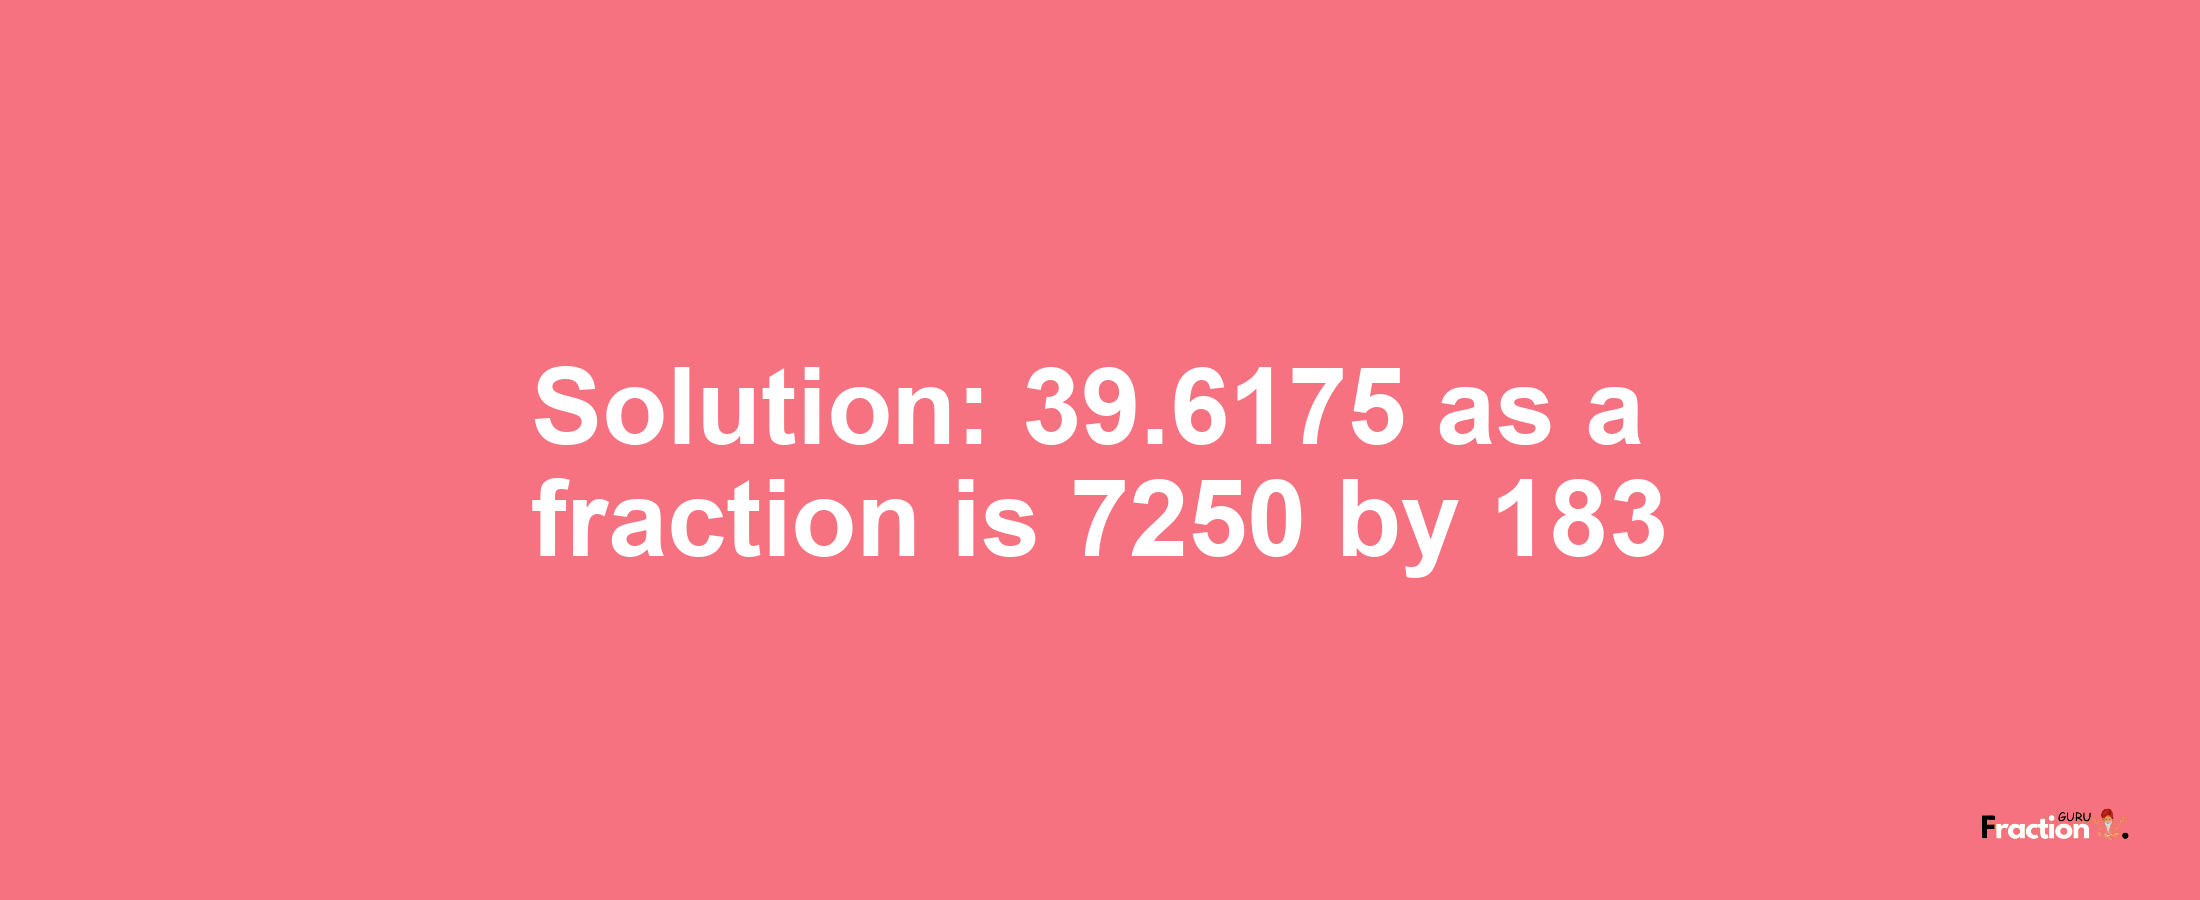 Solution:39.6175 as a fraction is 7250/183